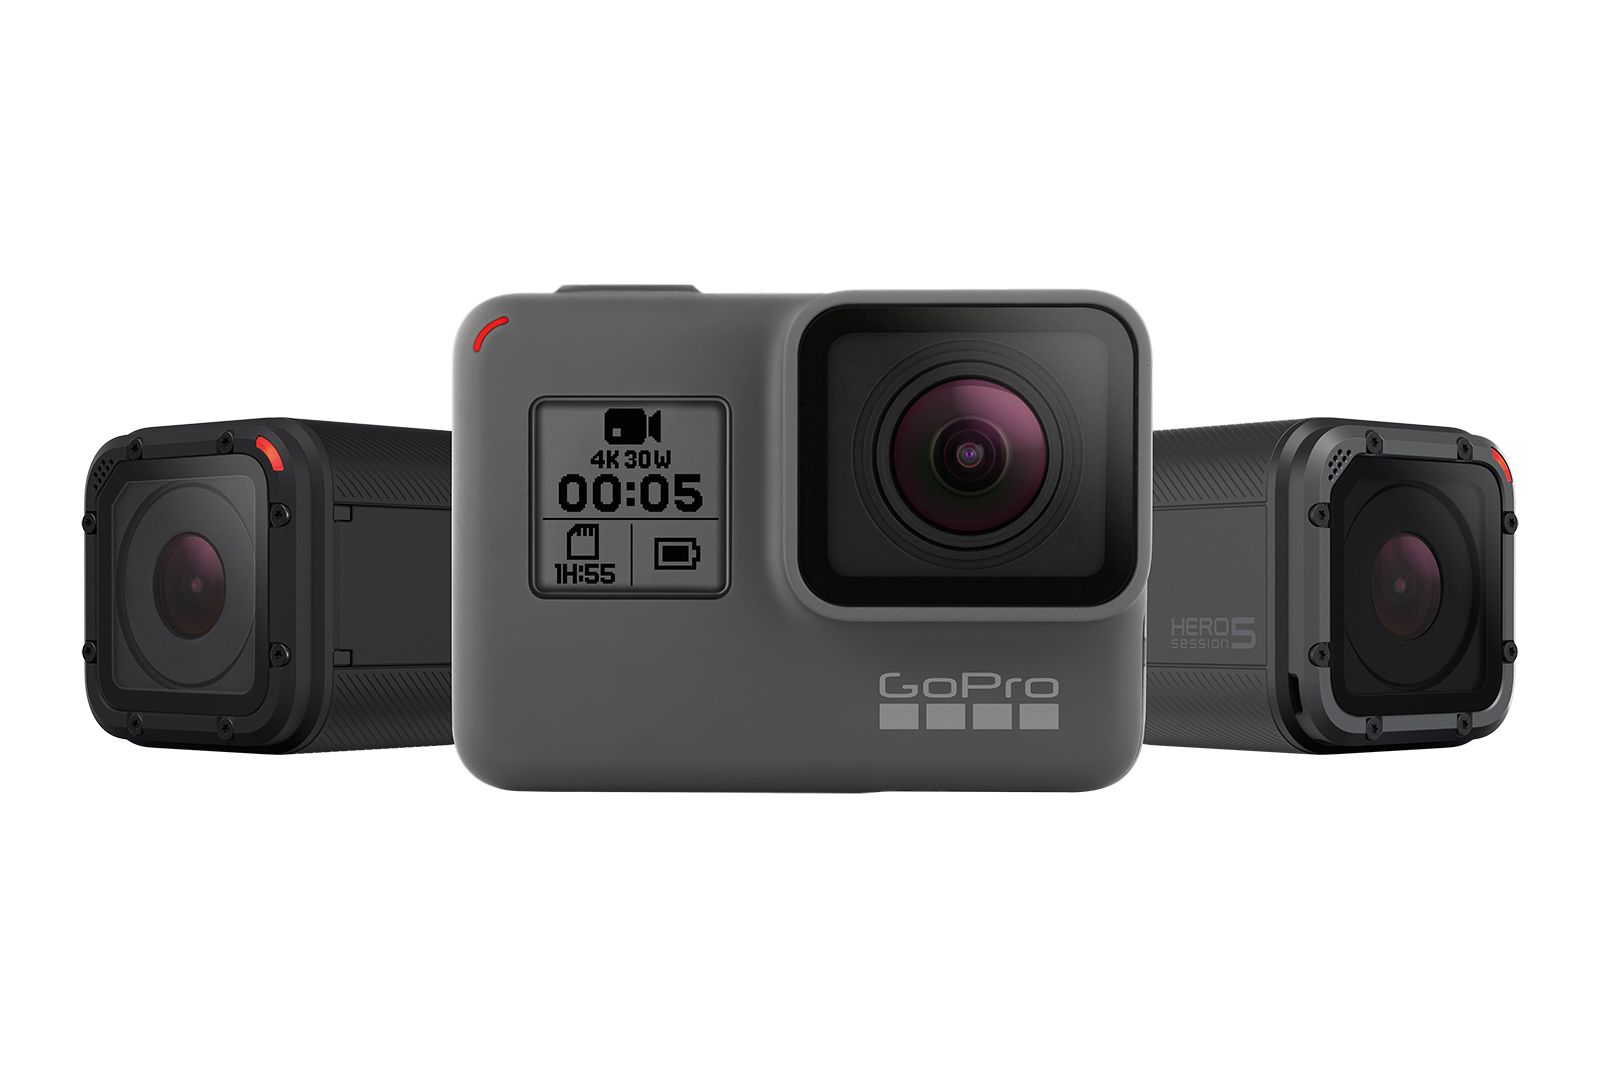 gopro hero 5 black and session cameras announced 4k video with gps and waterproofing image 1